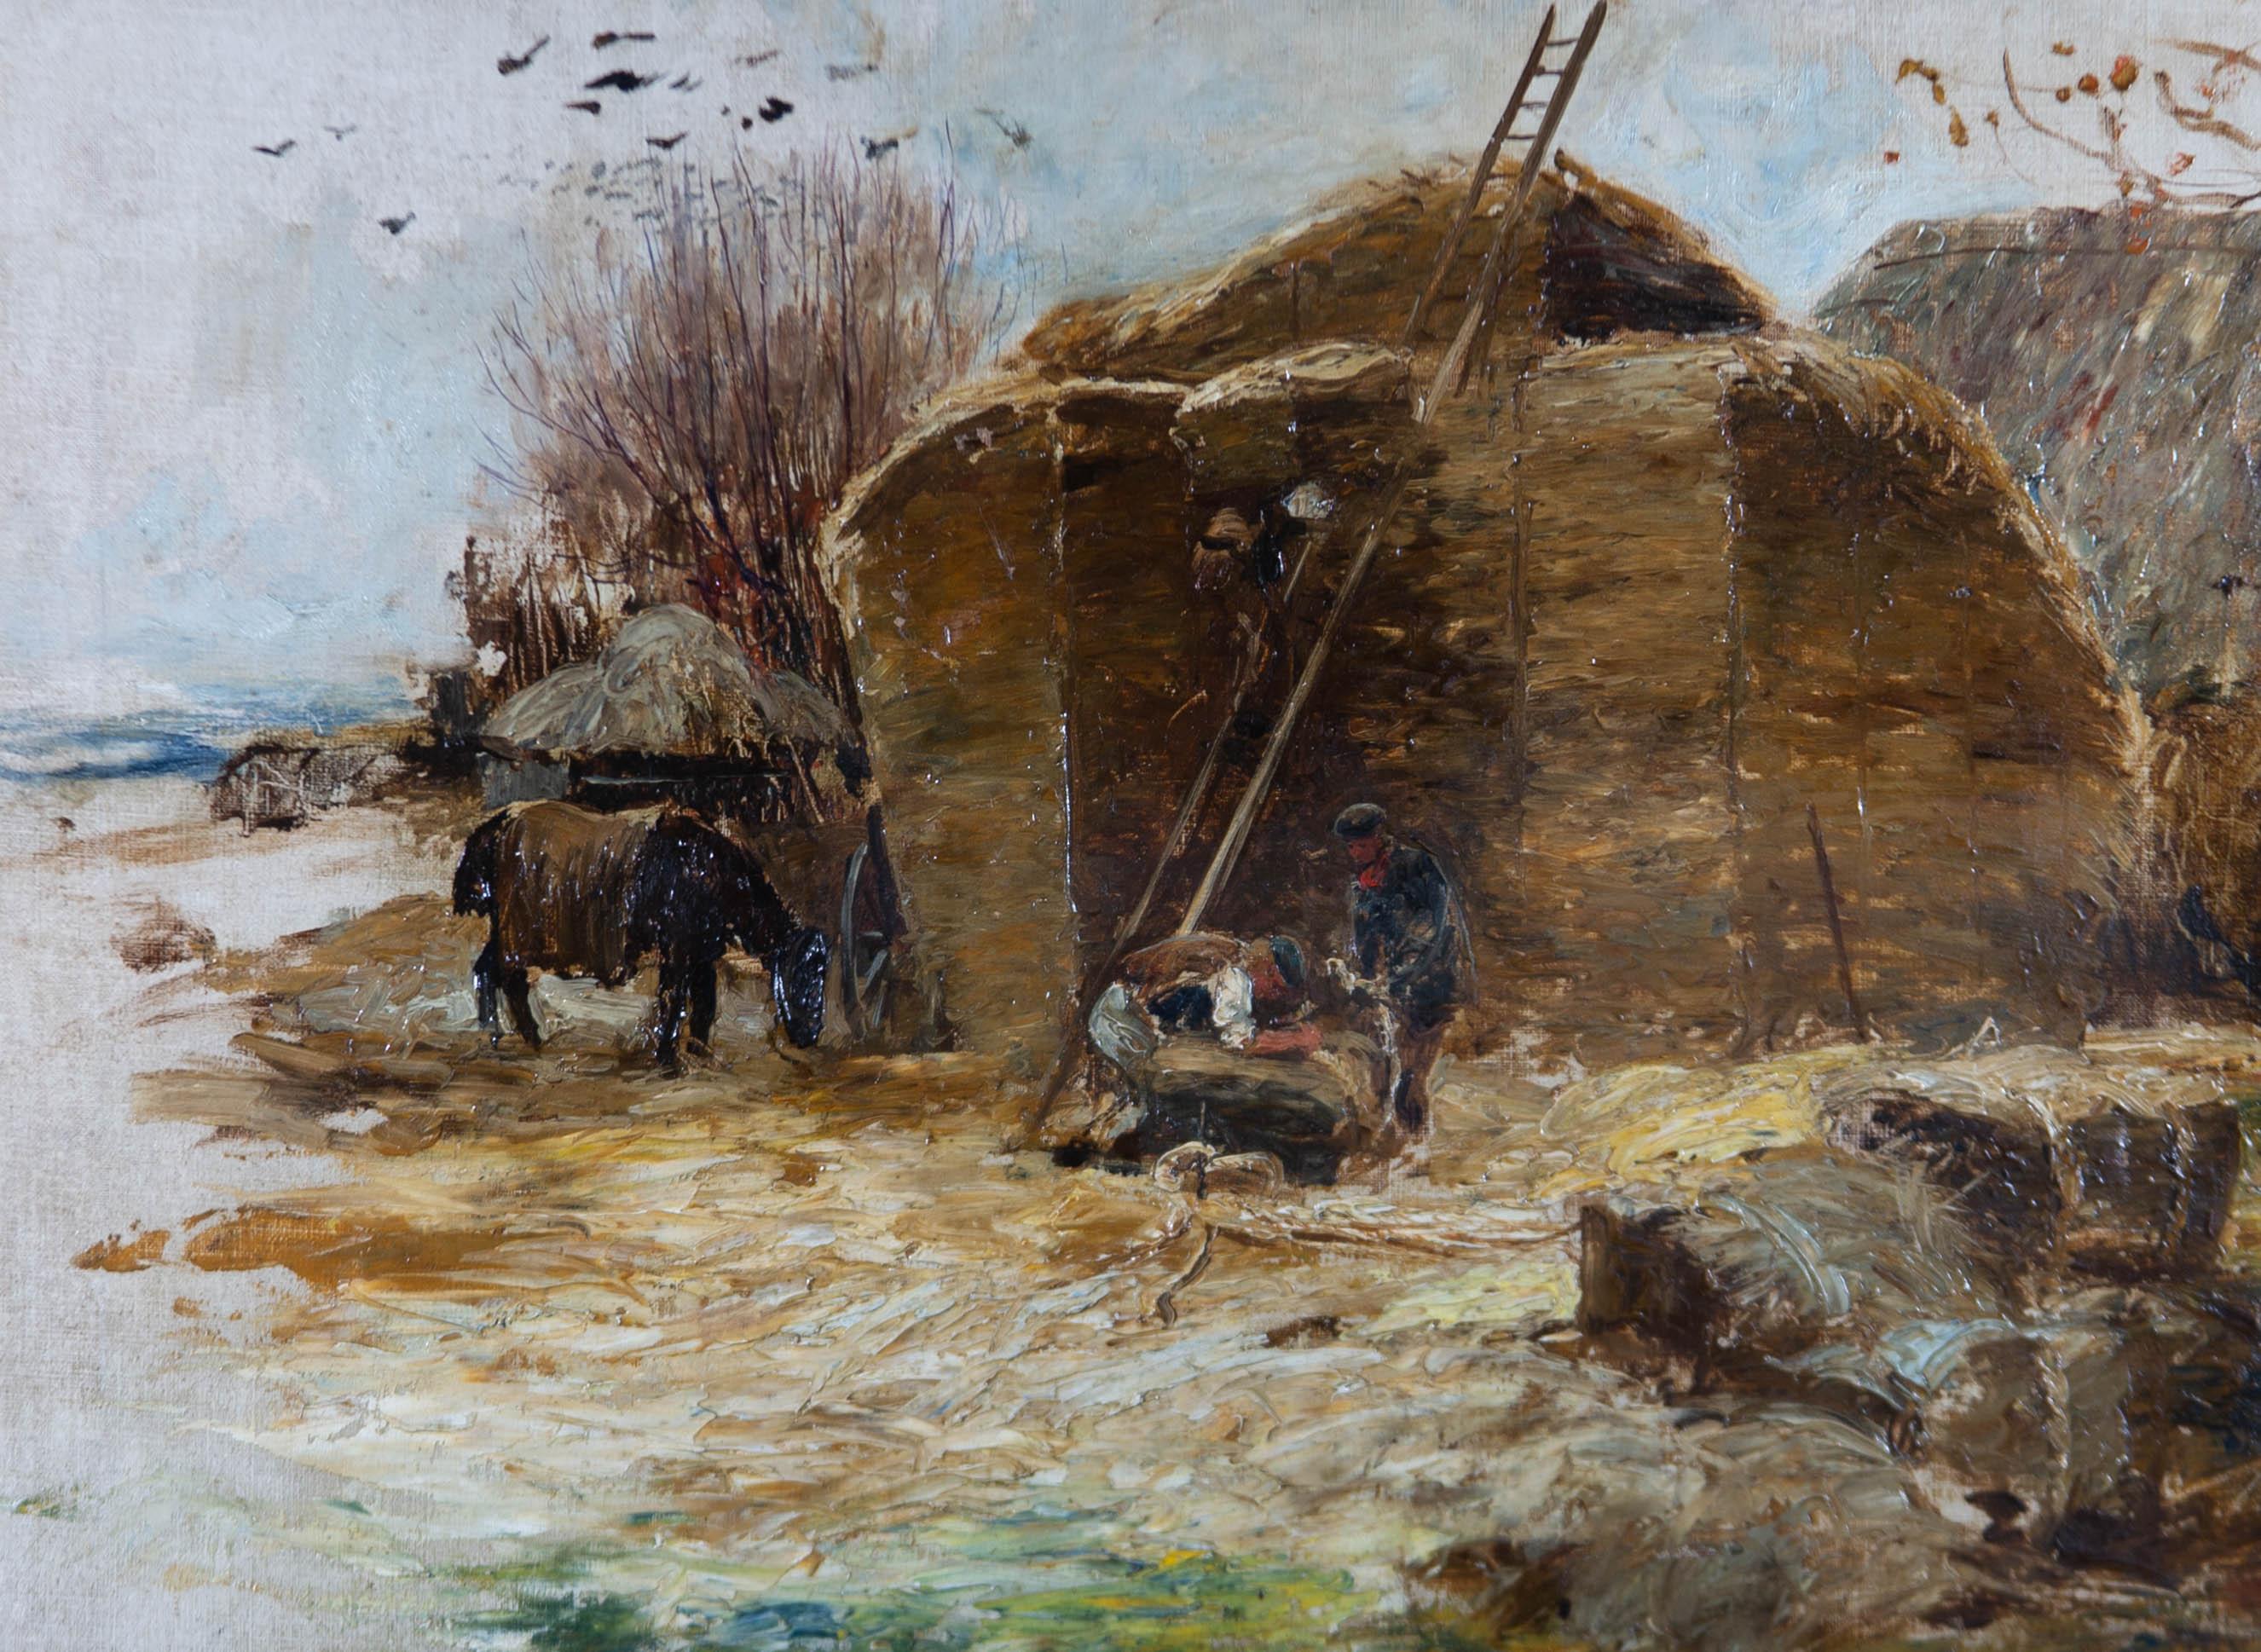 A wonderfully rustic, rural sketch in oil. This piece, likely a compositional test for a large, finer work, shows two men binding hay bails under a steel sky with their horse. The scene holds a nostalgic pastoral atmosphere, heightened by the earthy